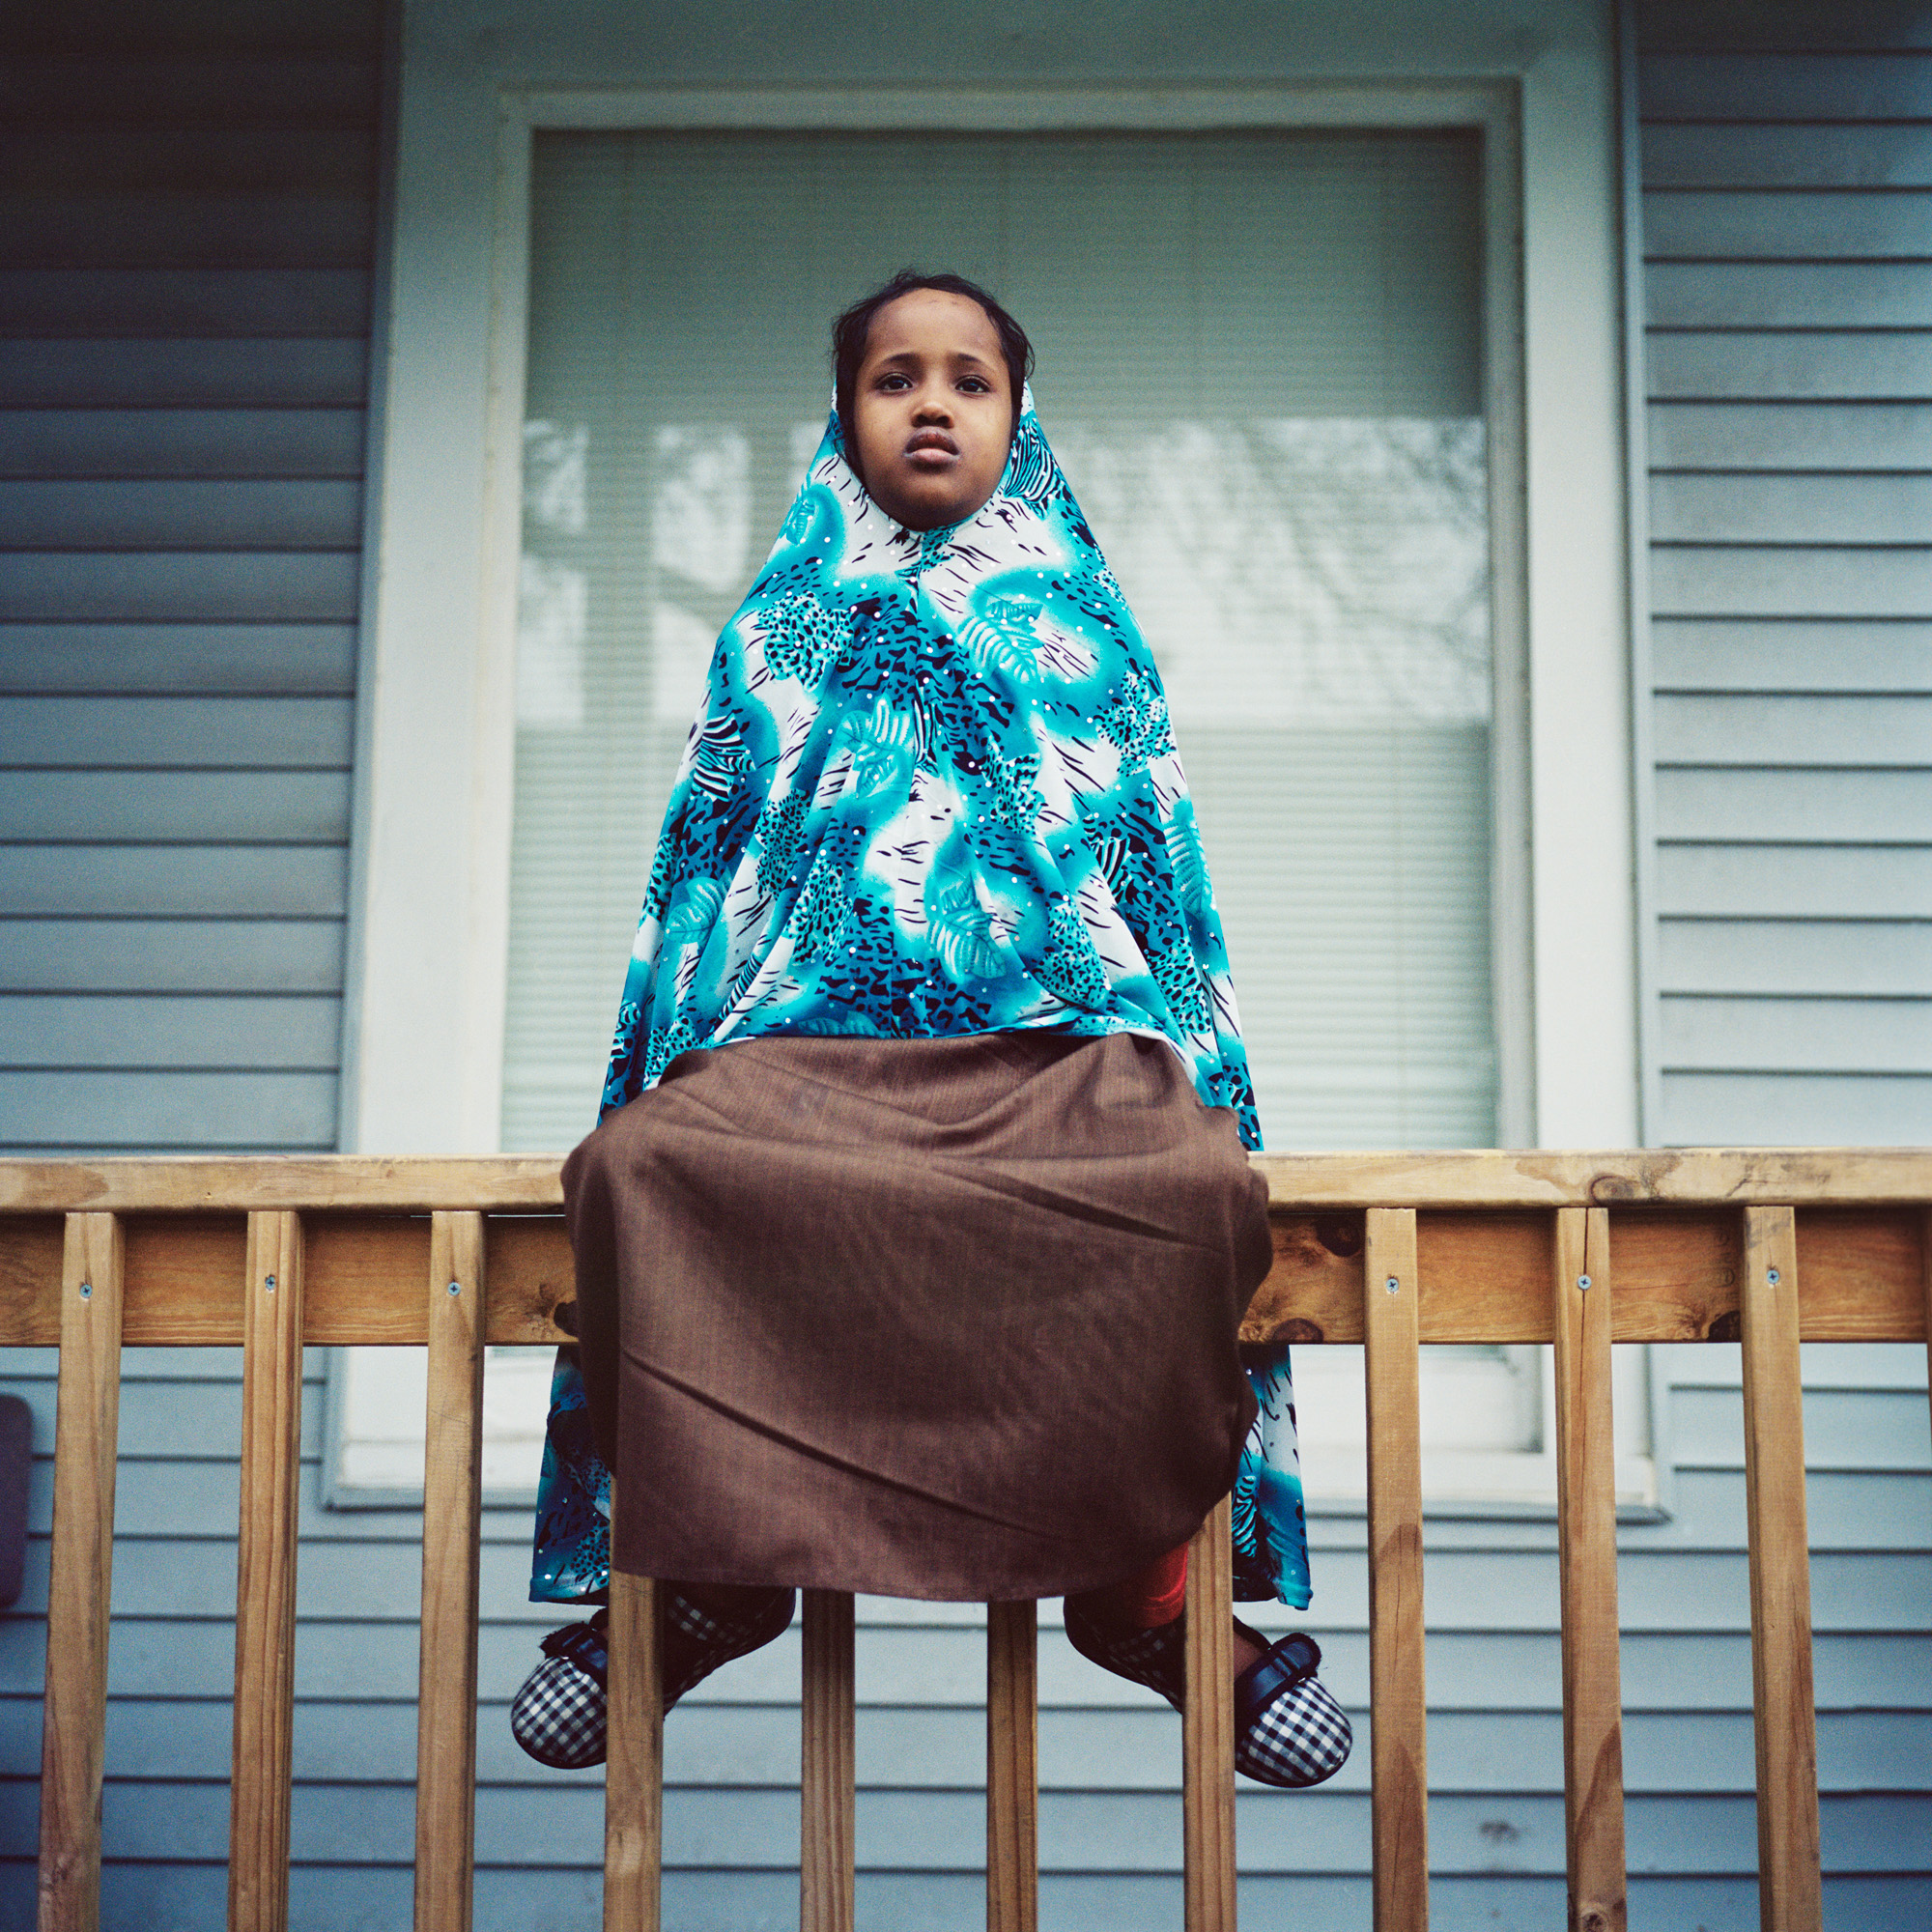 Selma Fernandez Richter, Kamilo Mohamud Noor, Minneapolis, MN, (from the Series The Ache for Home) Archival pigment print, 2011